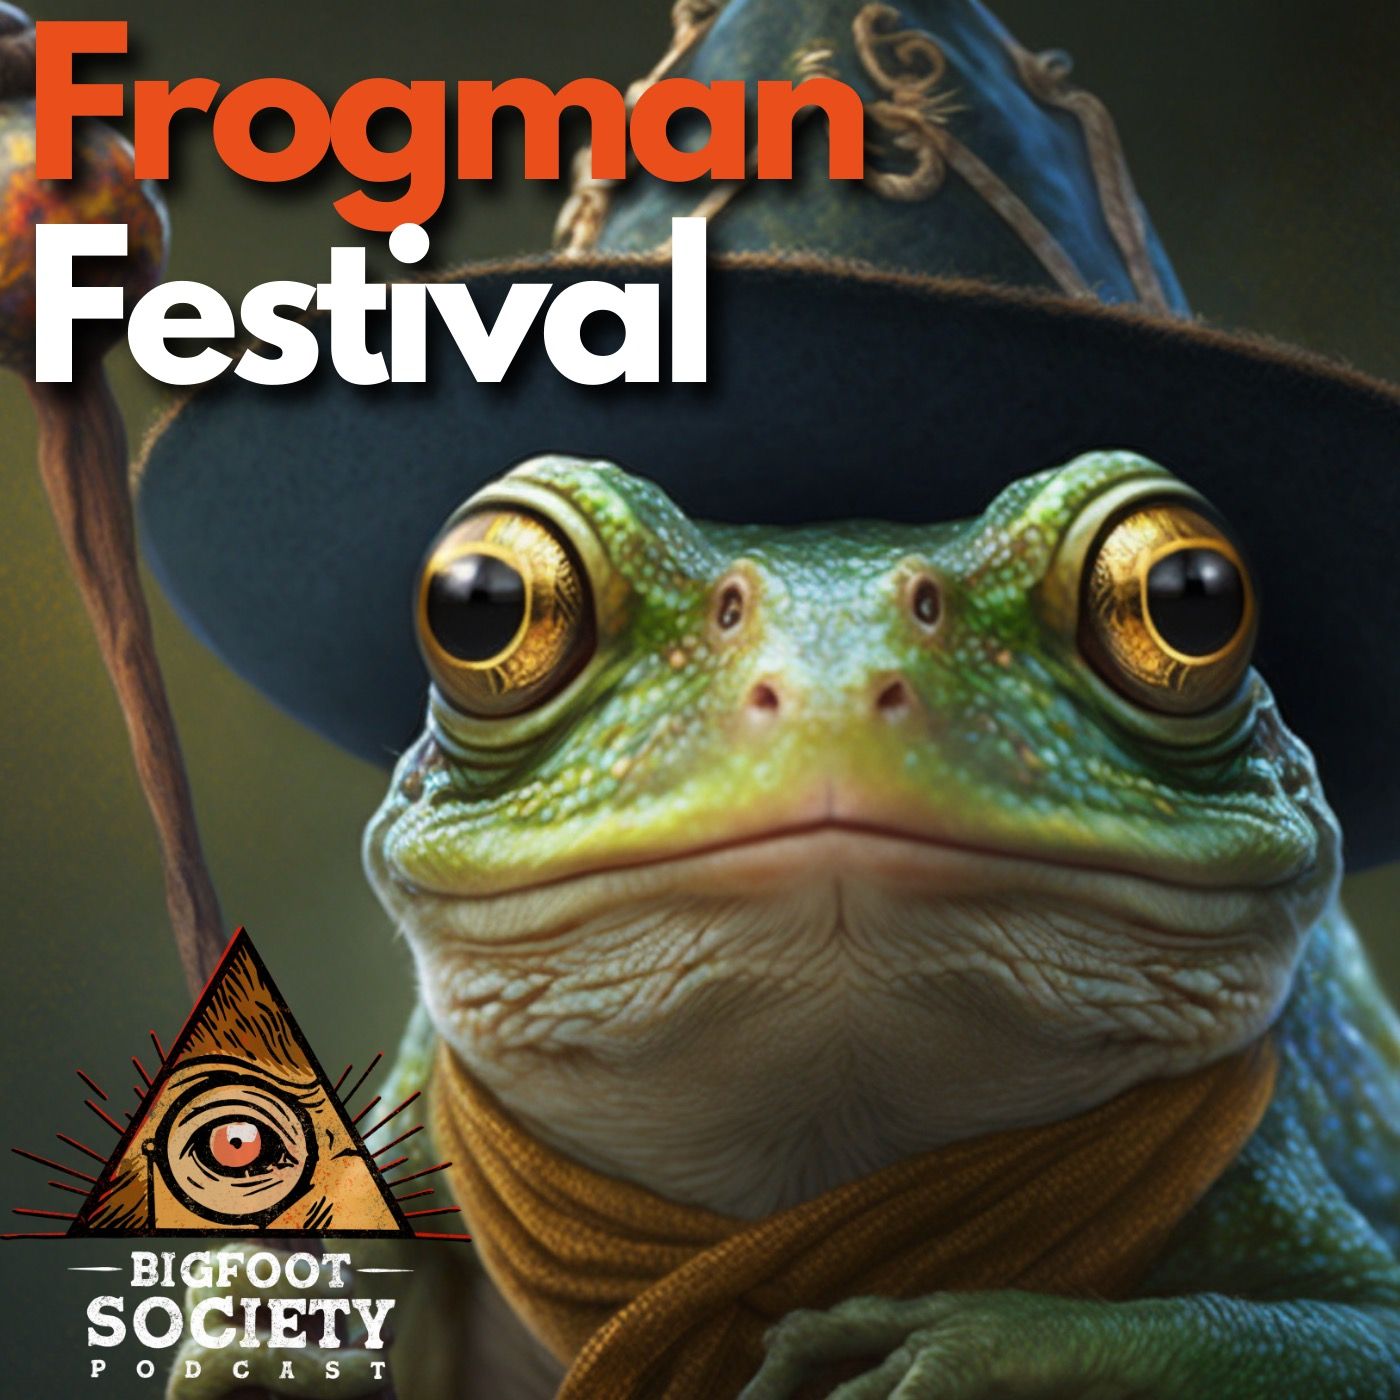 Exploring the Fascinating World of the Frogman Festival - A Community Spotlight